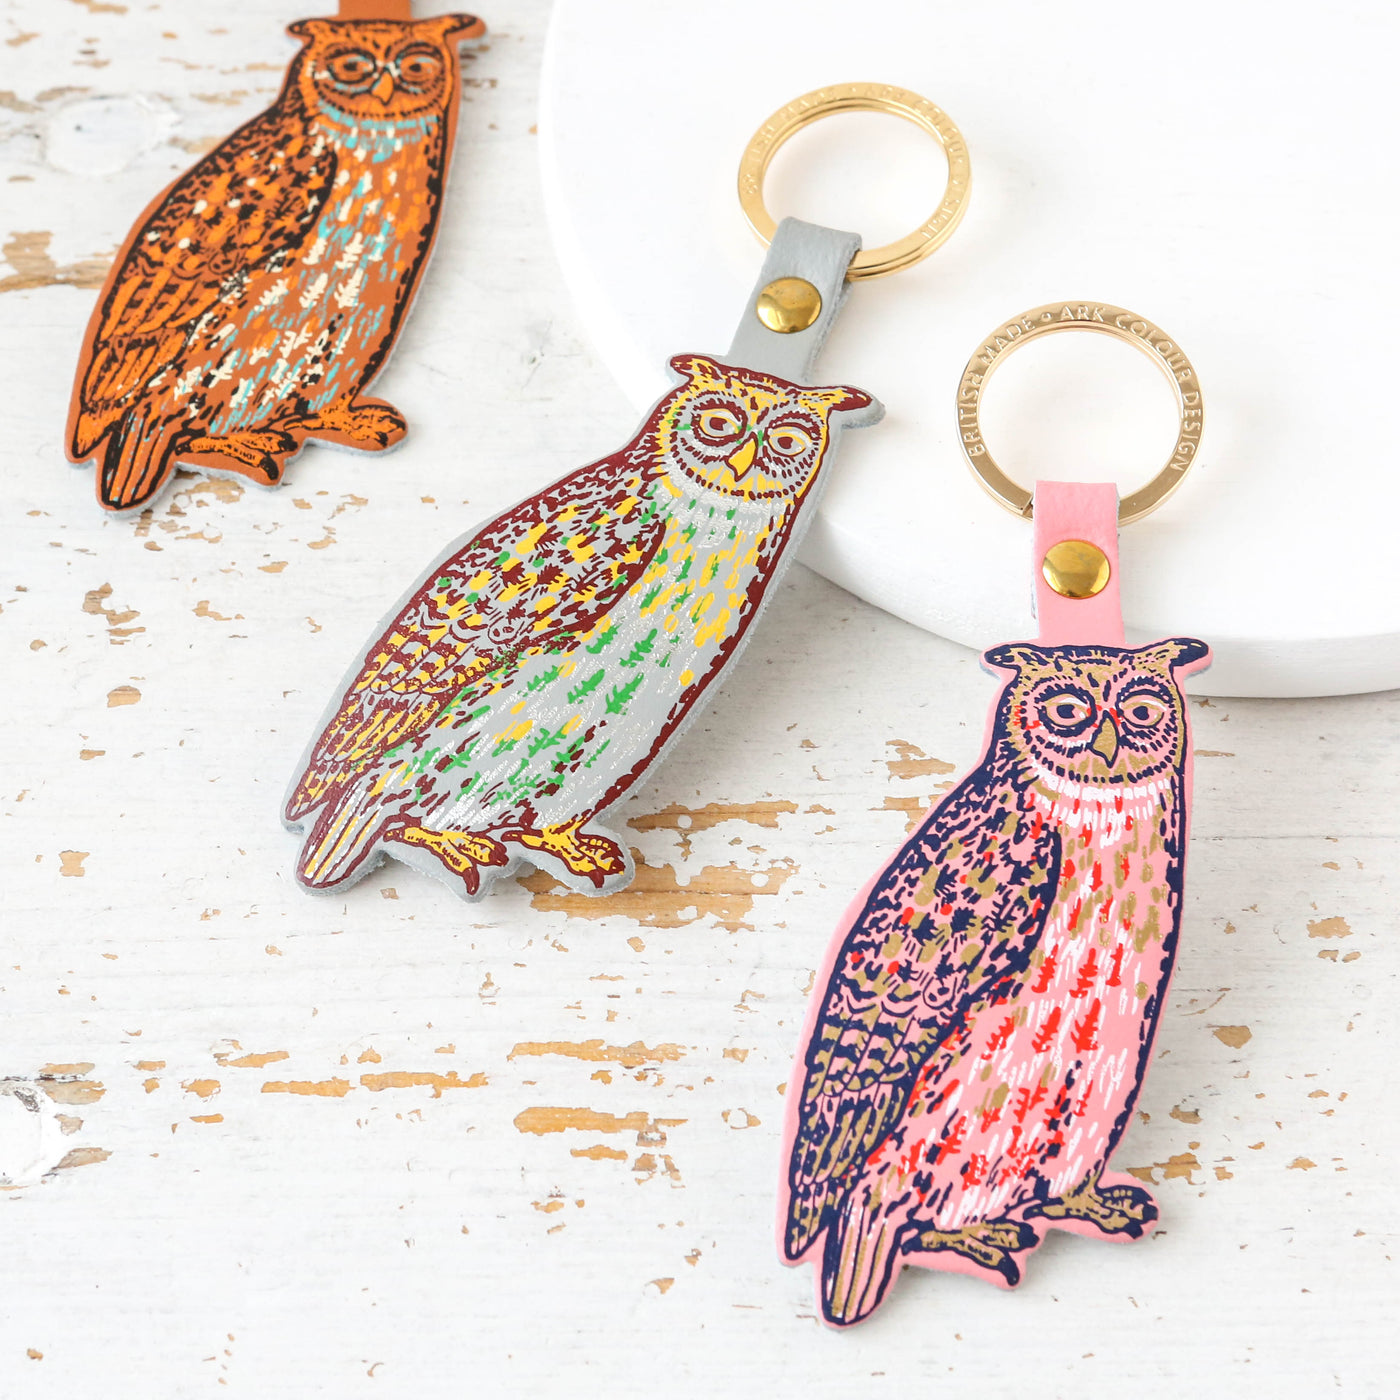 Nocturnal Owl Shaped Leather Key Fob